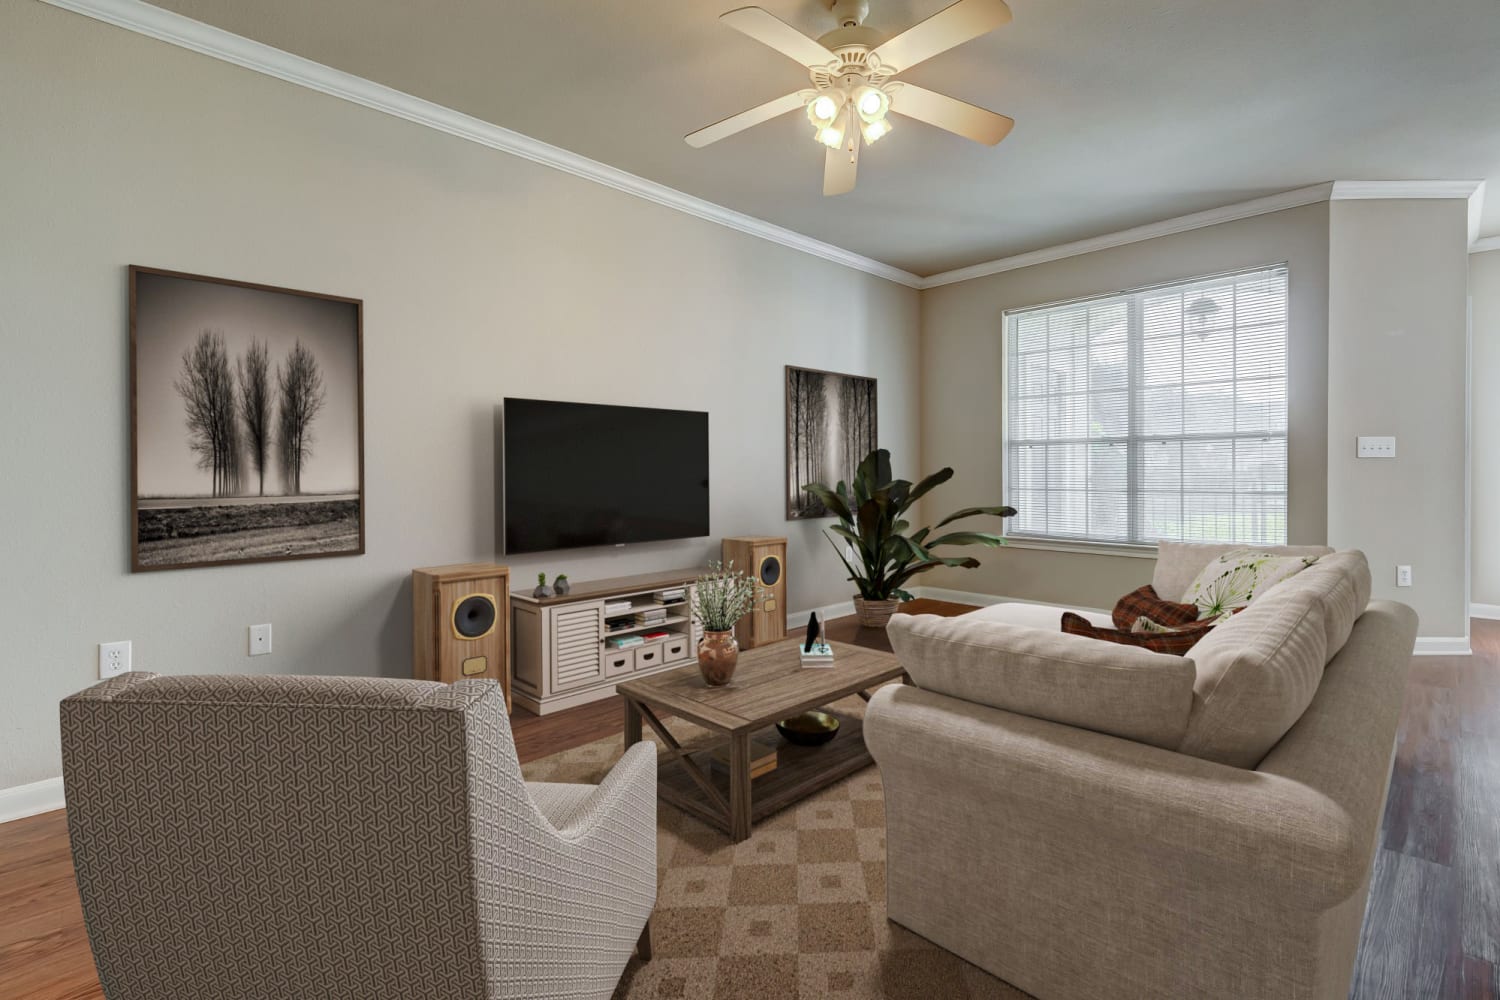 Living room with large windows at Chateau des Lions Apartment Homes in Lafayette, Louisiana